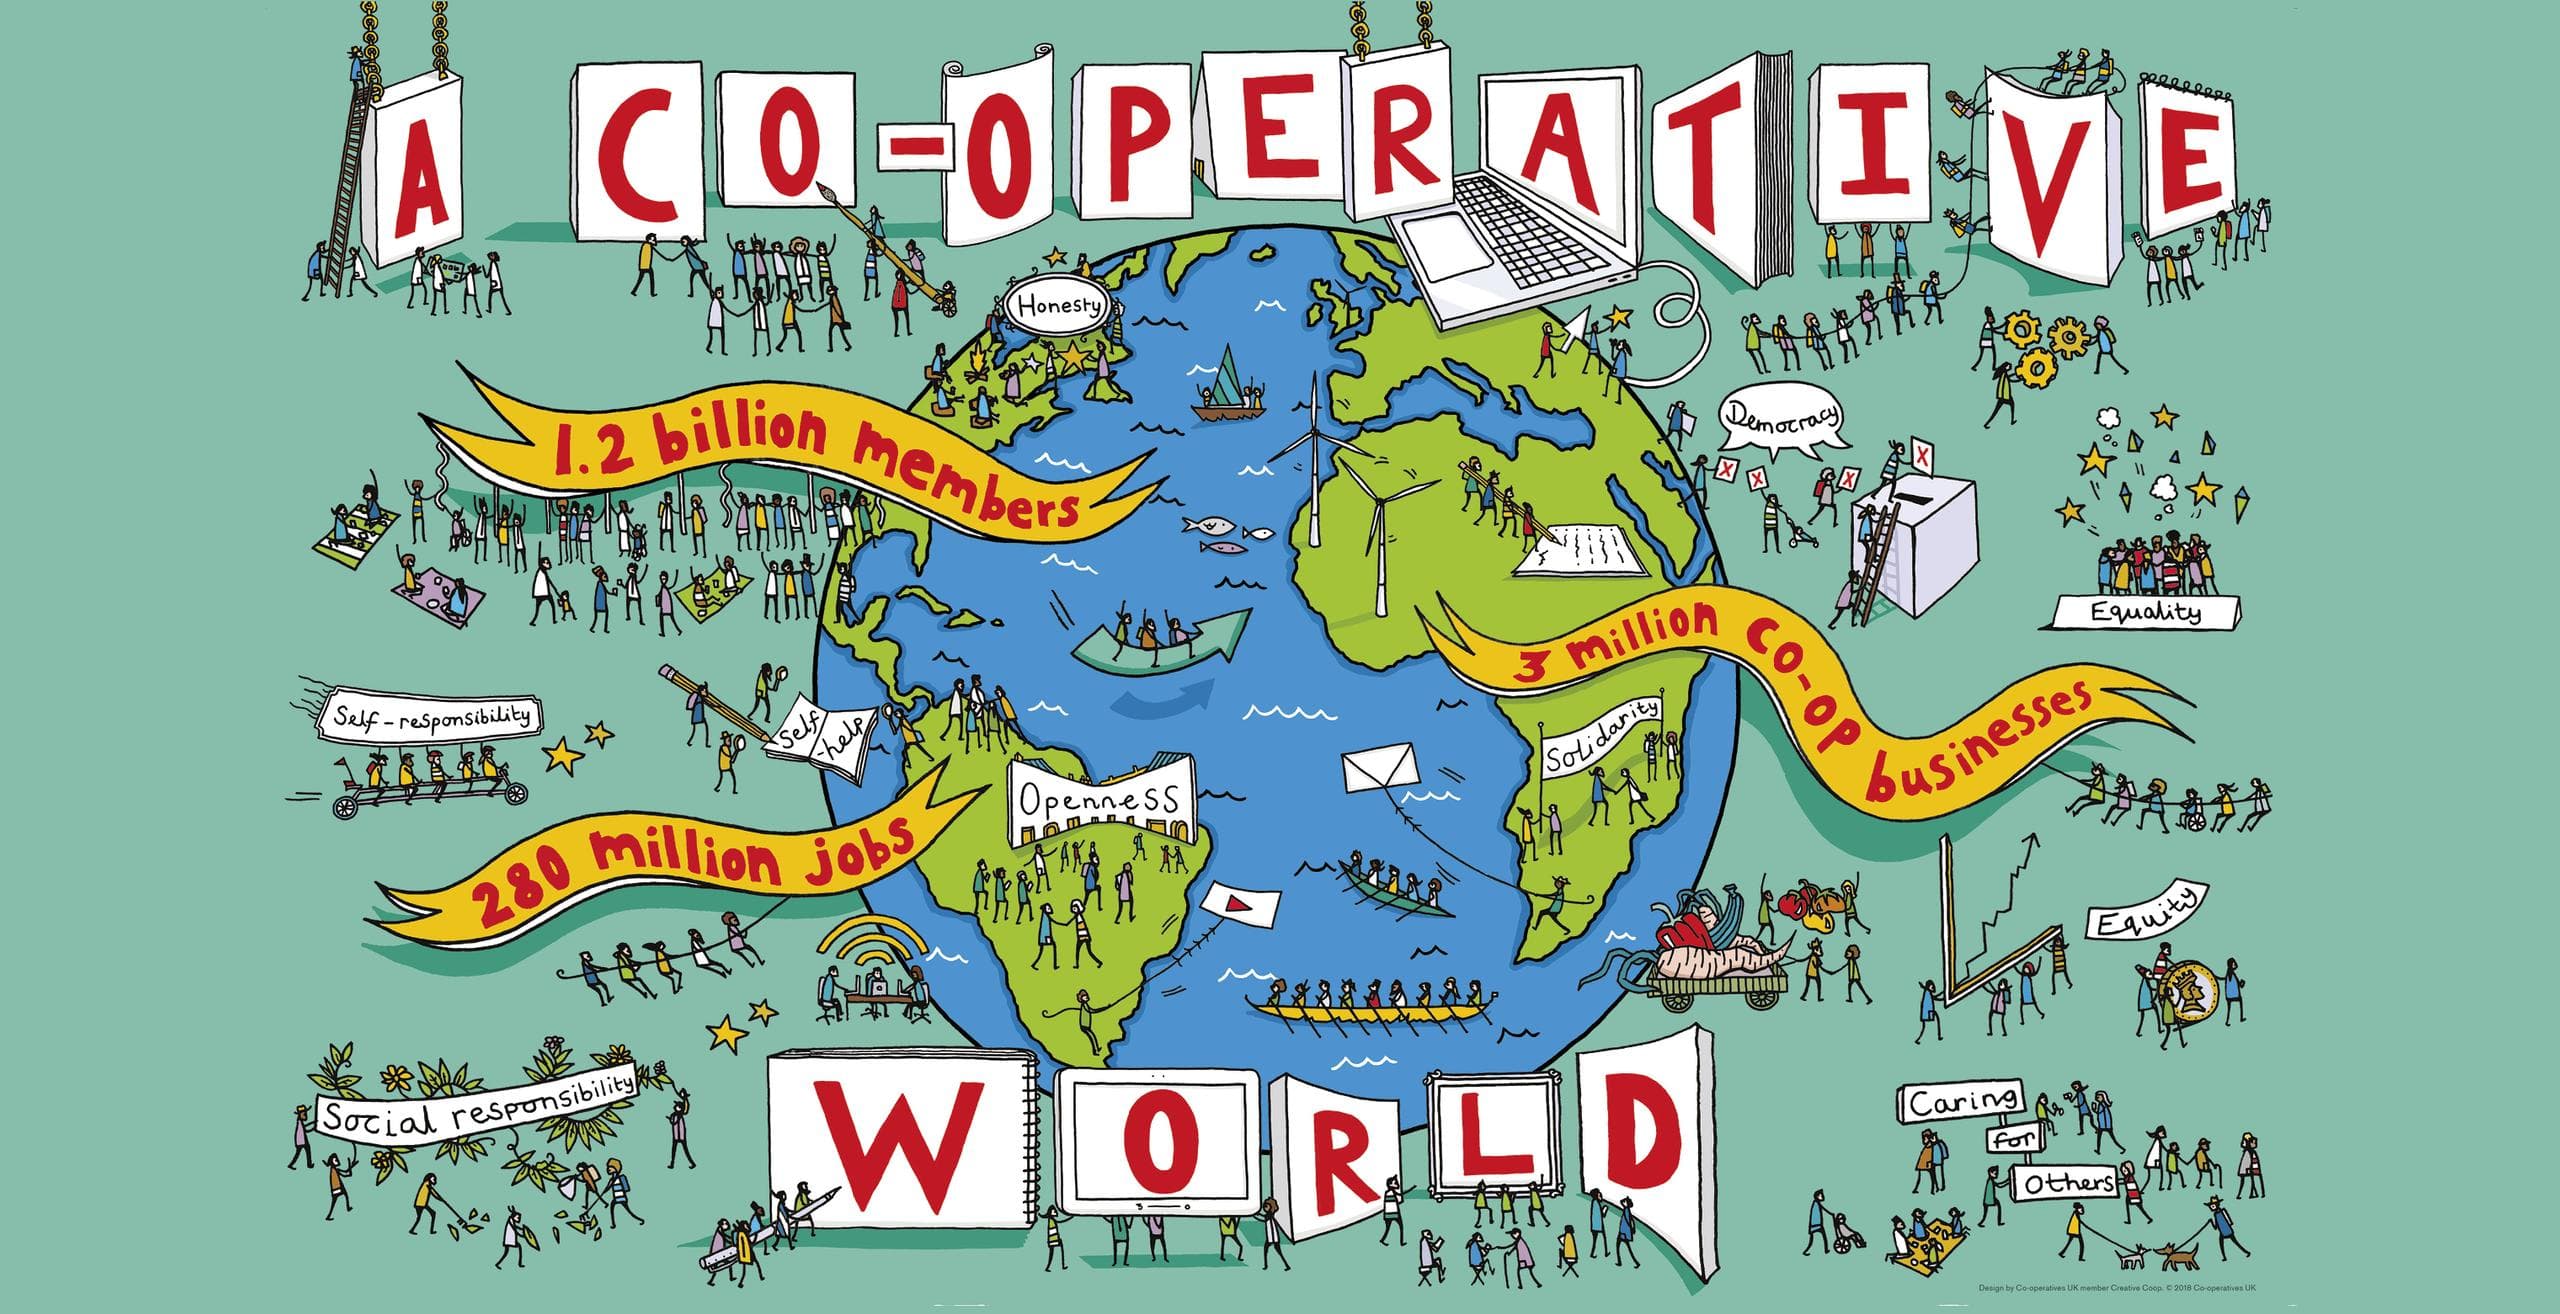 An illustrated poster called 'A Co-operative World' showing lots of little people doing different things like rowing a boat and working in a garden. co-operatively